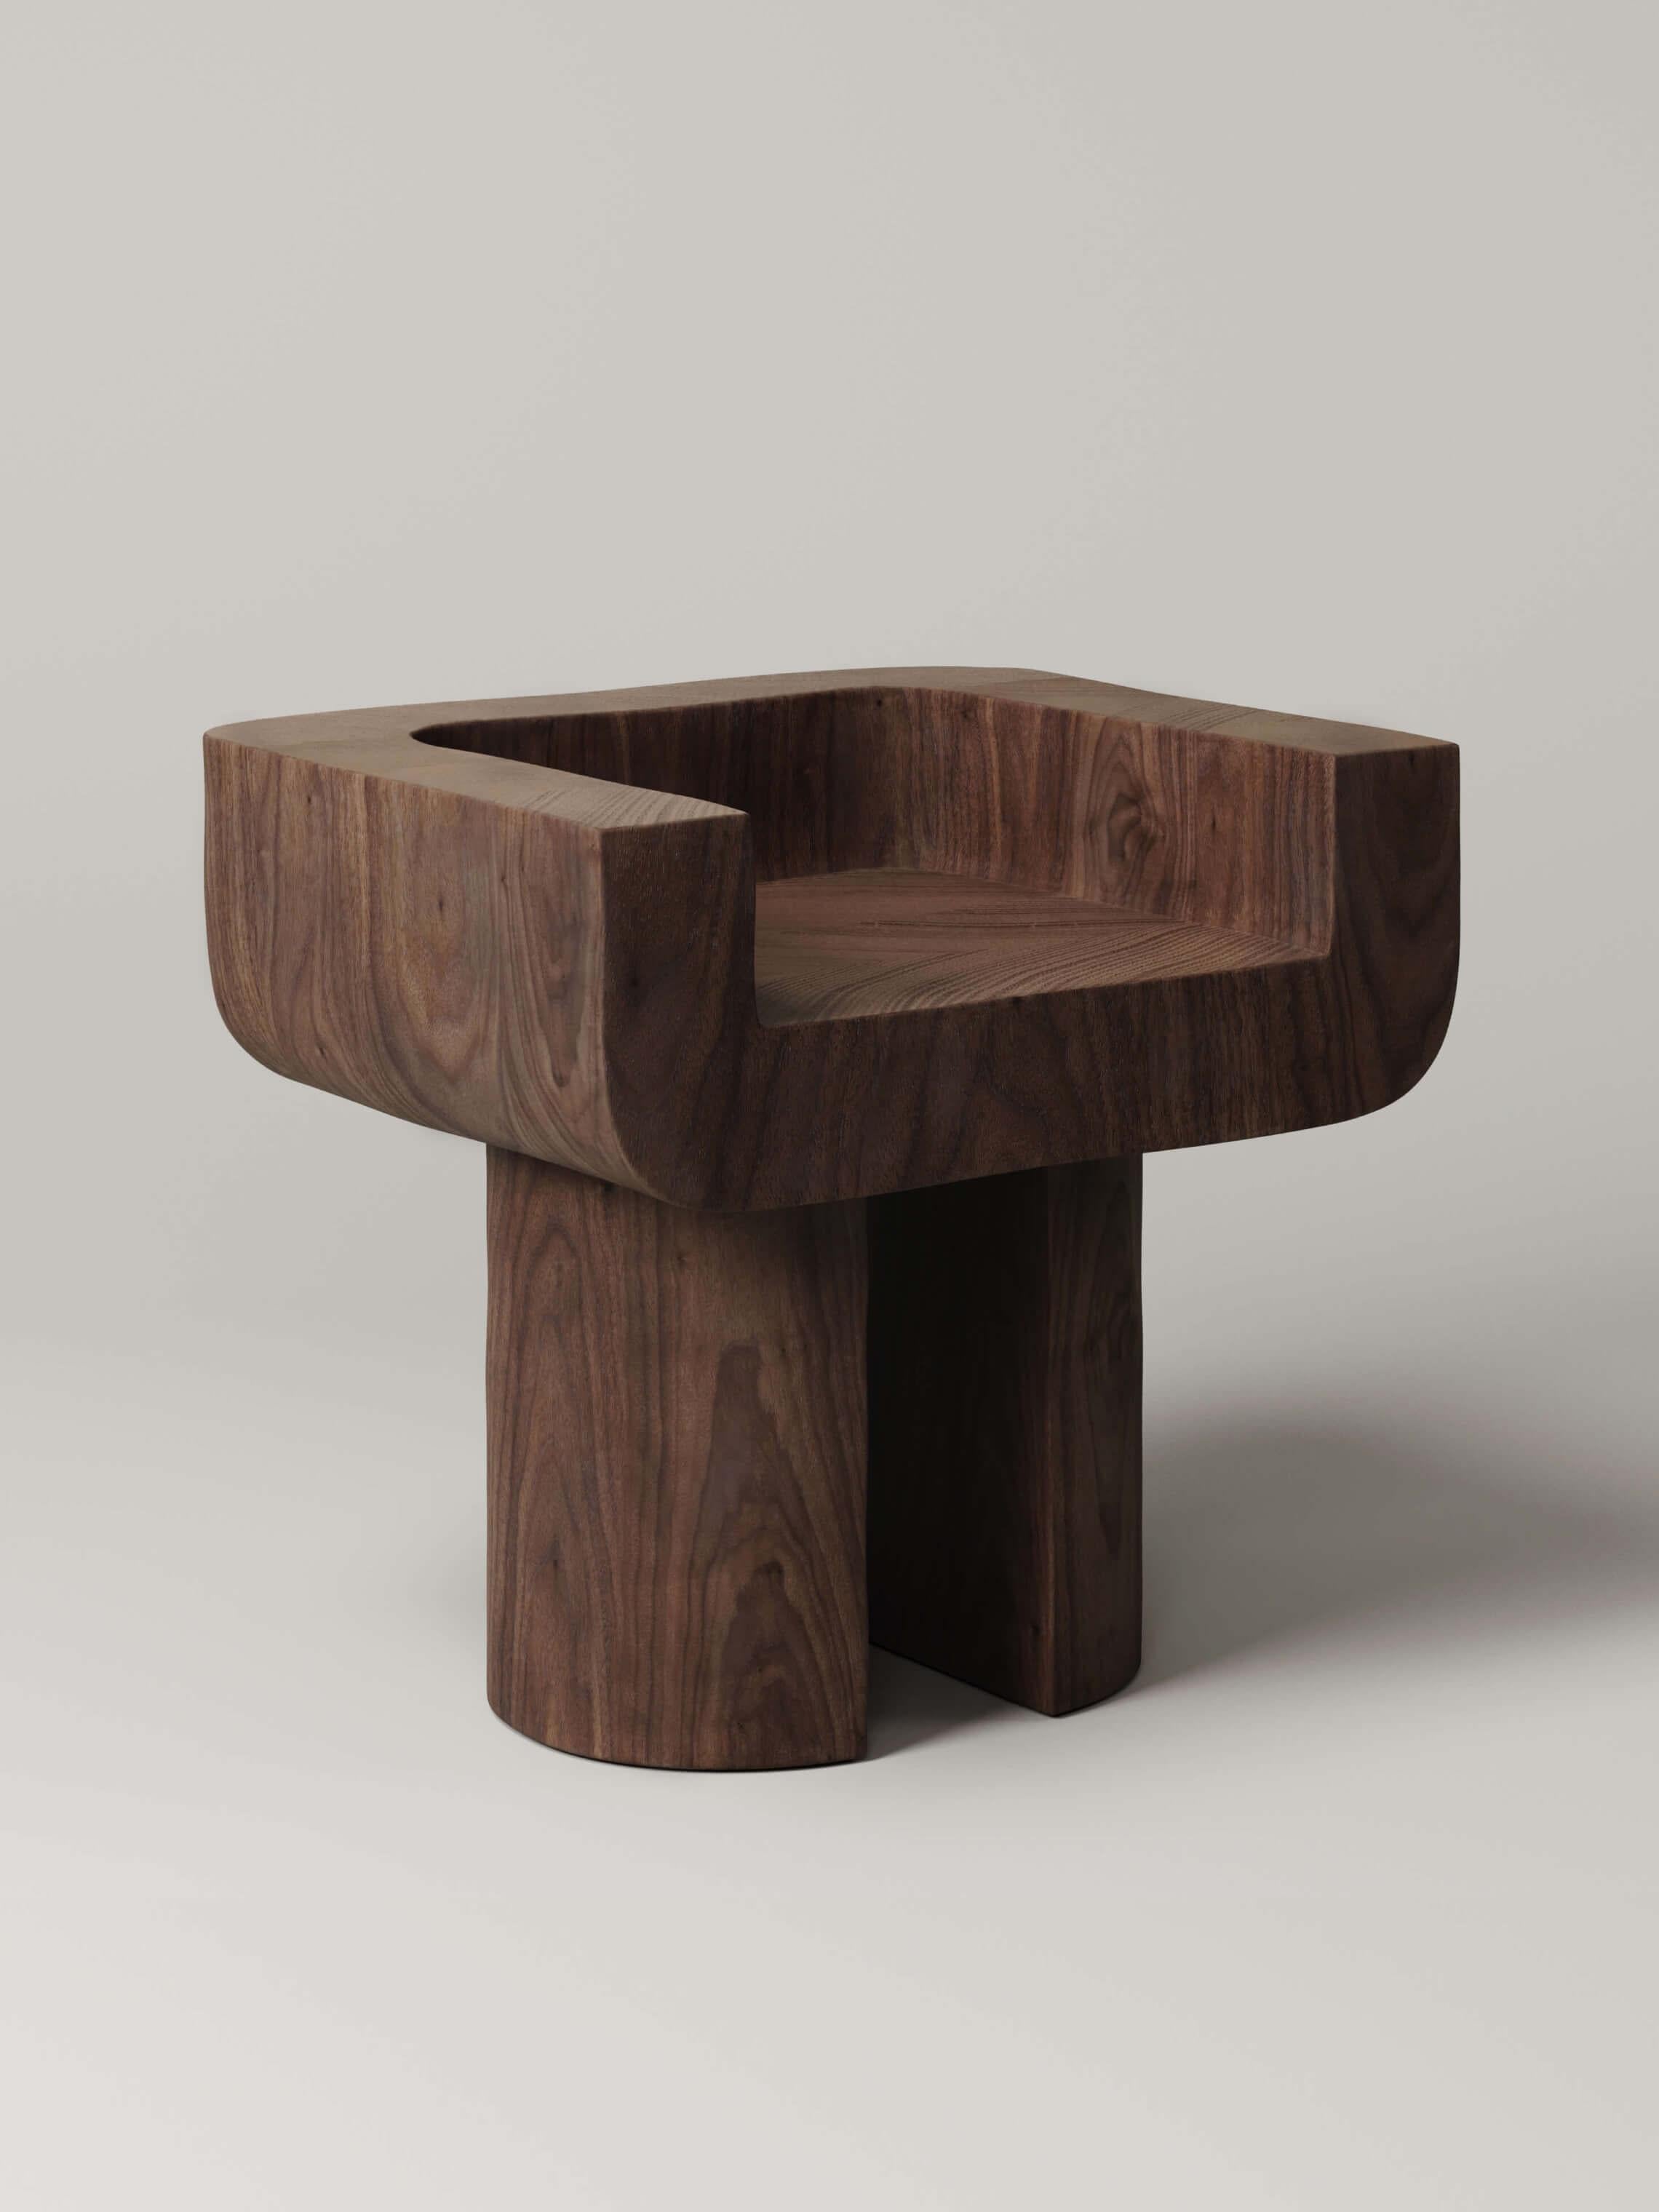 M_001 Walnut Chair by Monolith Studio
Signed and Numbered.
Dimensions: D 53,5 x W 65 x H 58,5 cm.
Materials: Walnut. 

Aavailable in travertine, white onyx, lava rock and white oak. Please contact us. 

Monolith, founded in 2022 by Marc Personick,